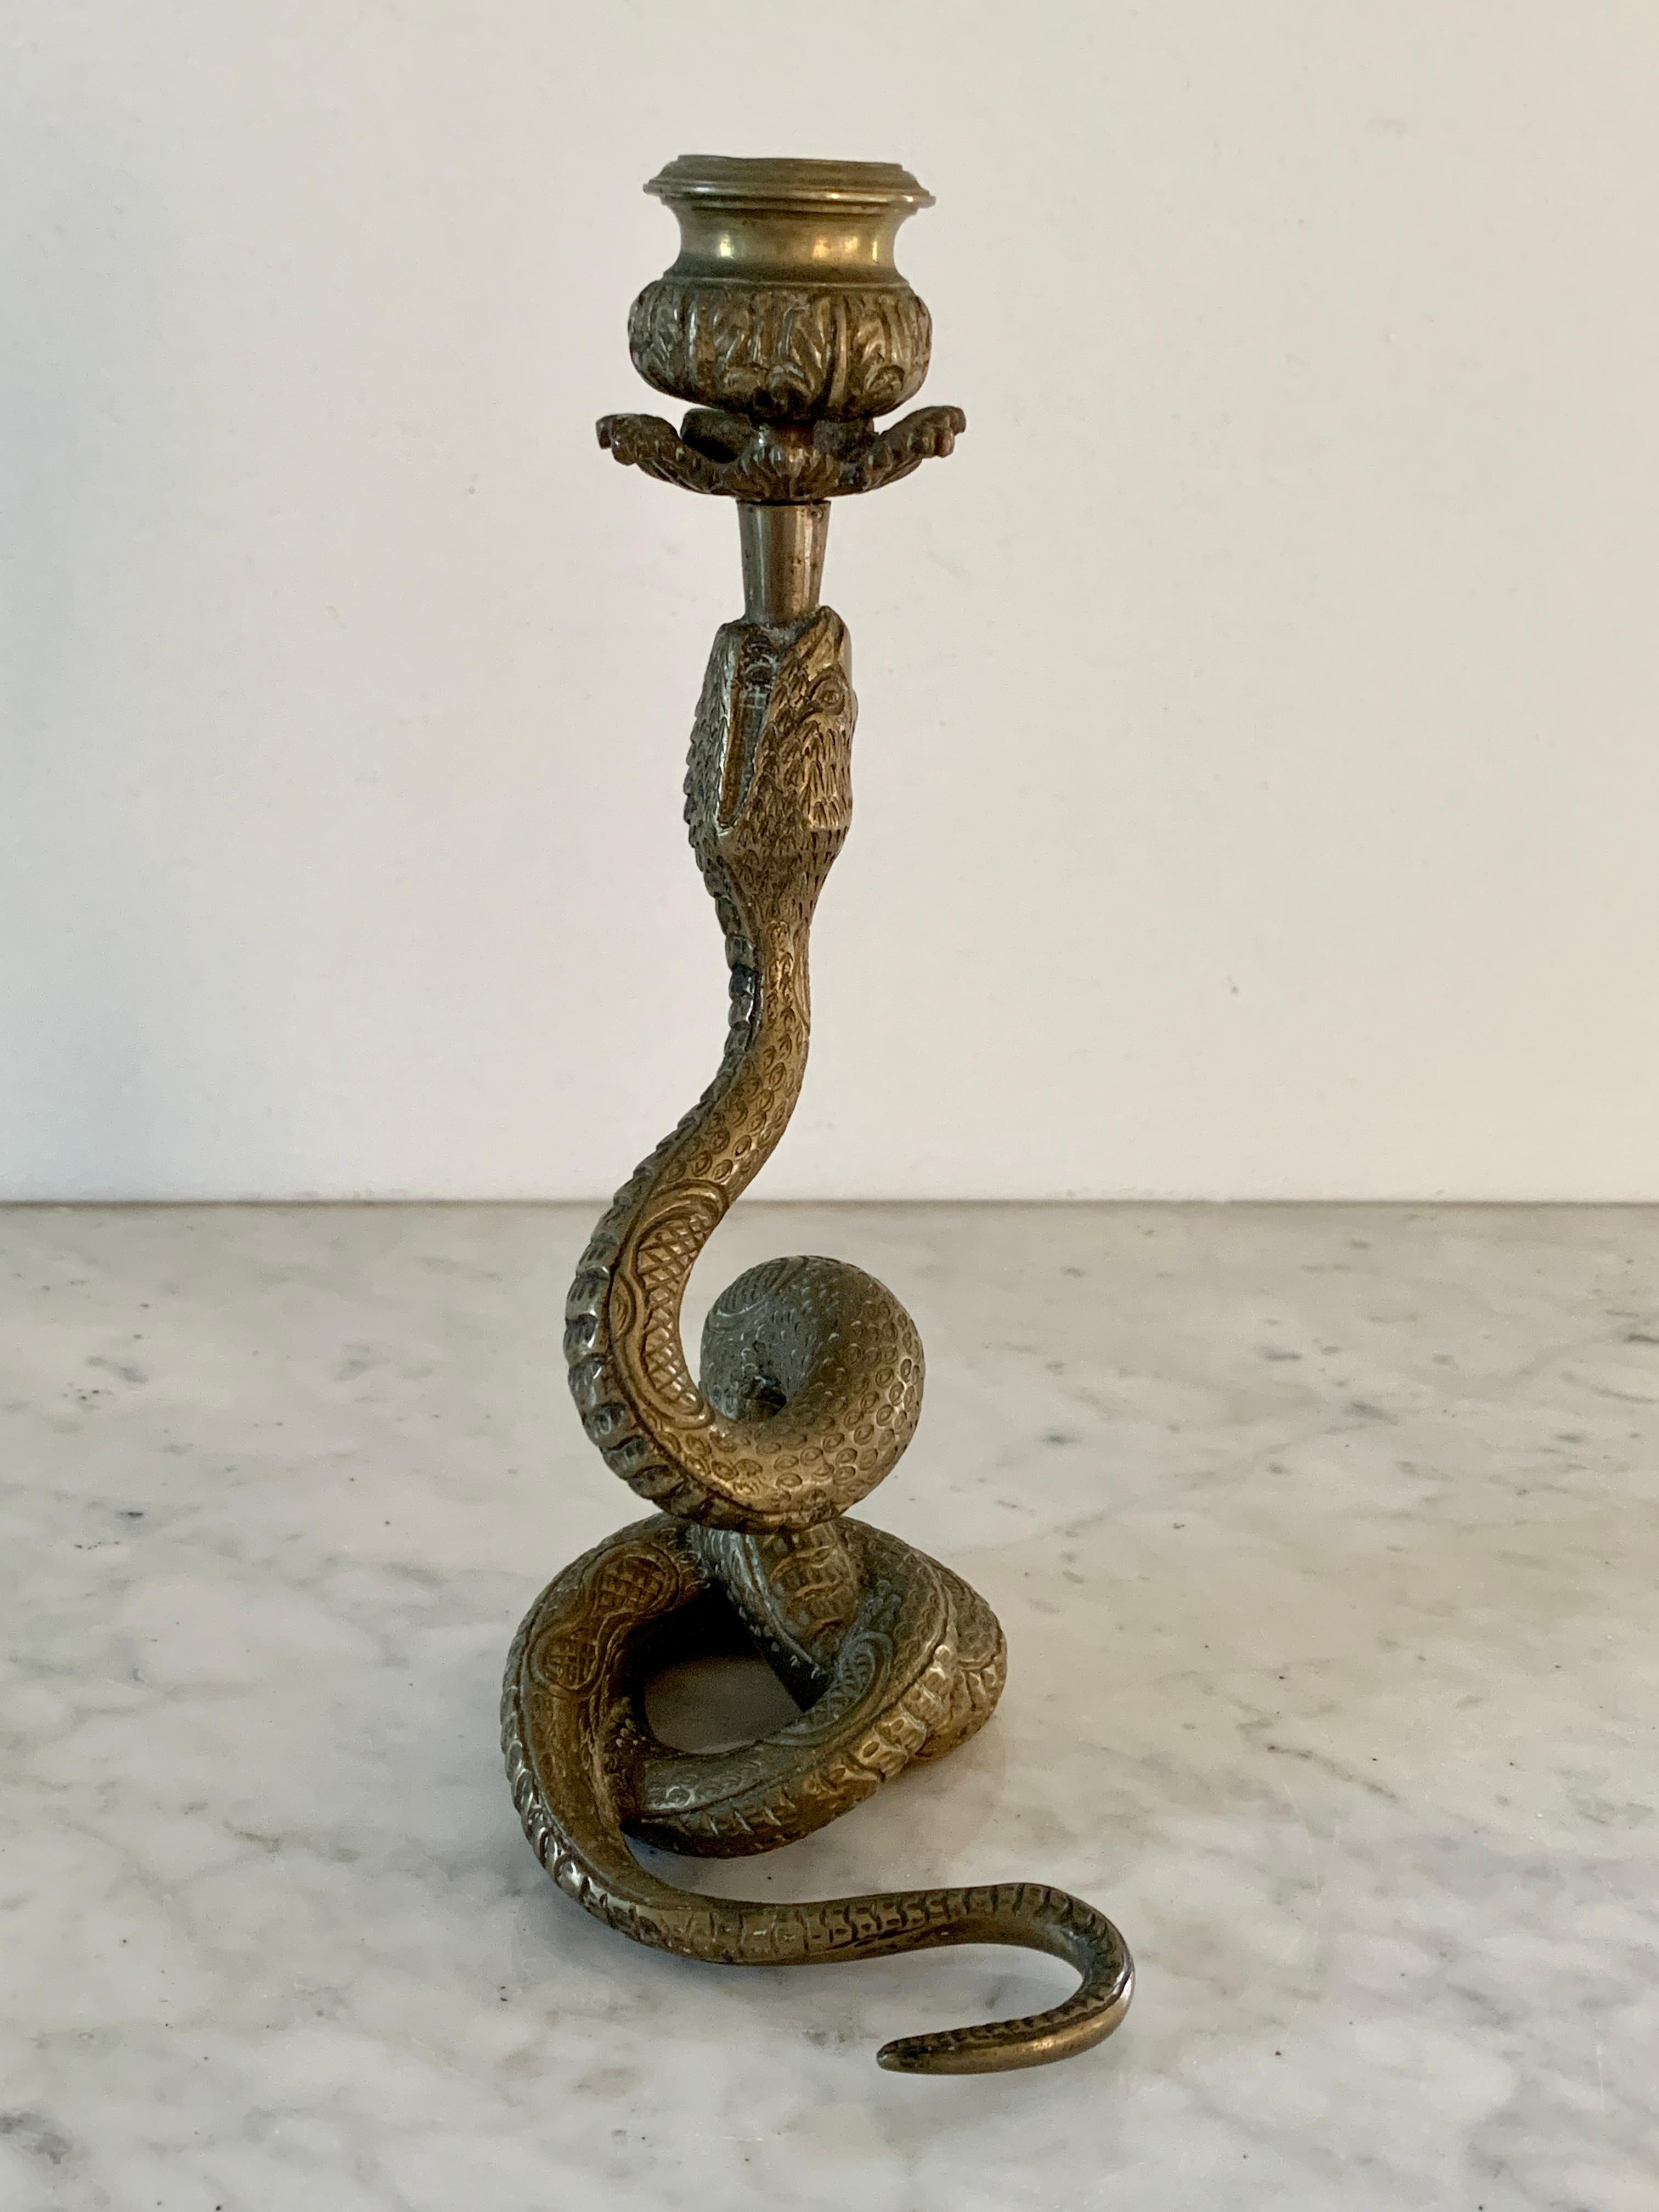 A wonderful Art Deco style brass snake candle holder.

circa mid-20th century

Measures: 4.75